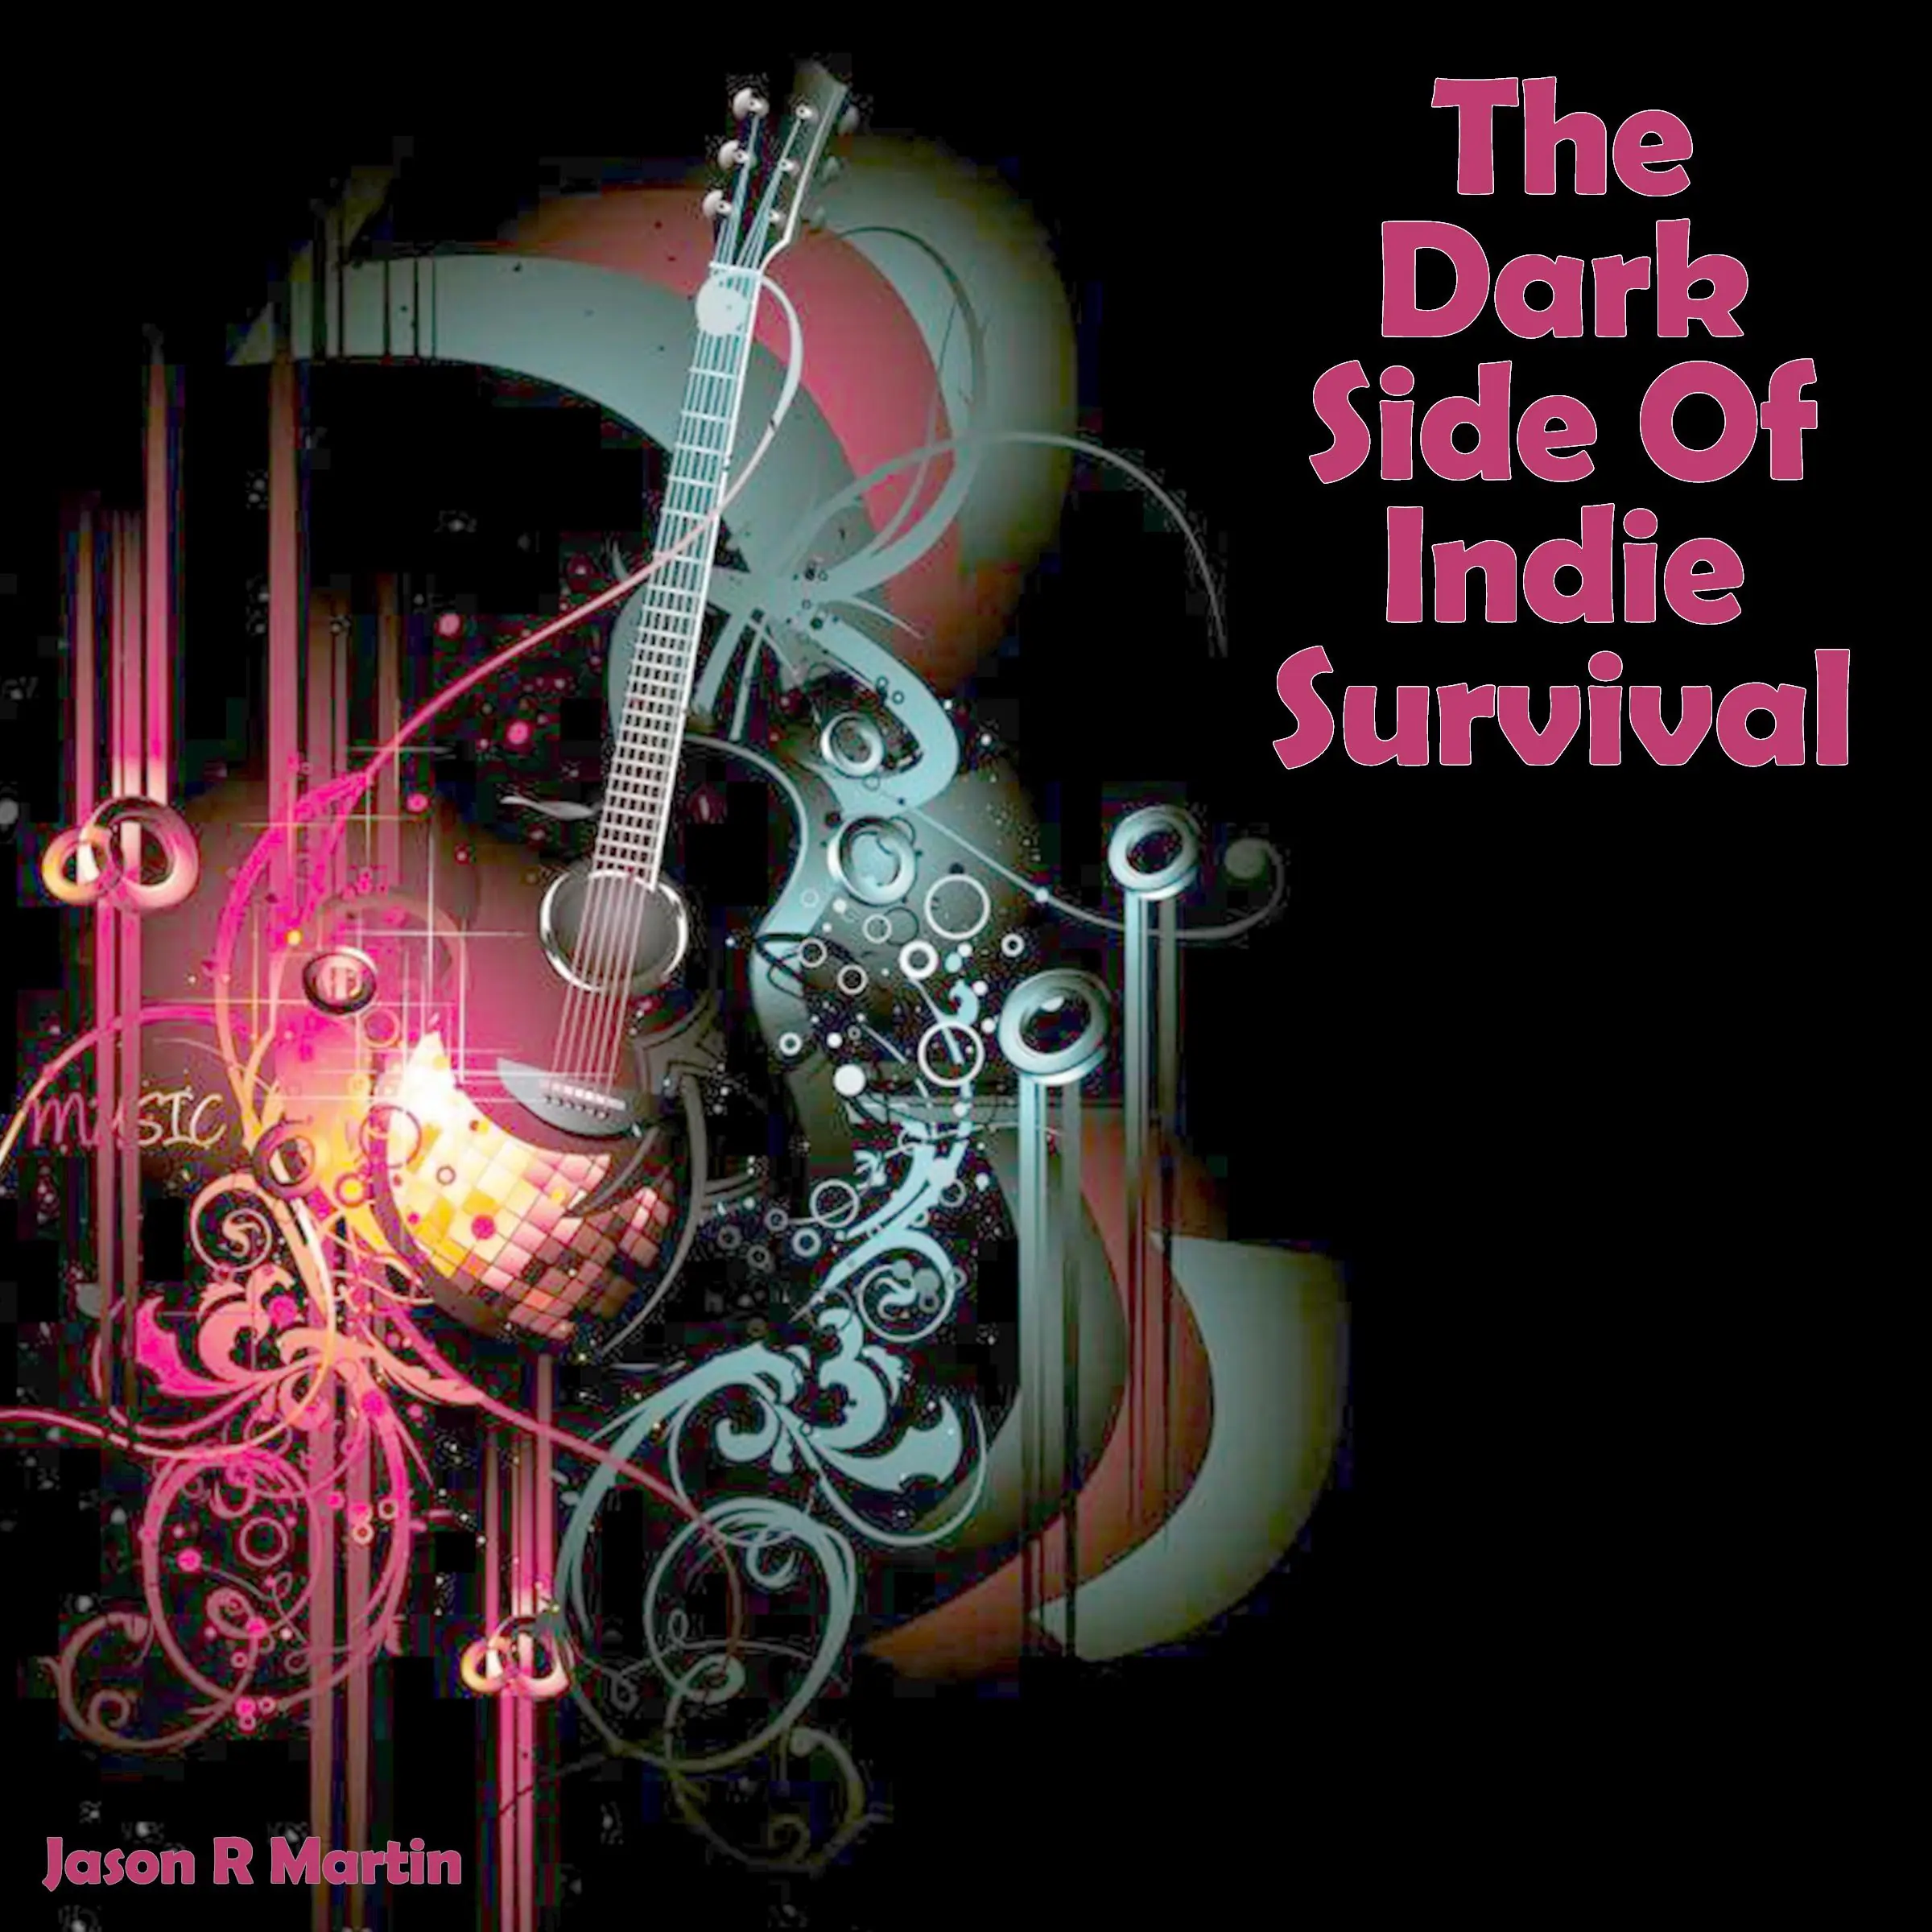 The Dark Side Of Indie Survival by Jason R Martin Audiobook